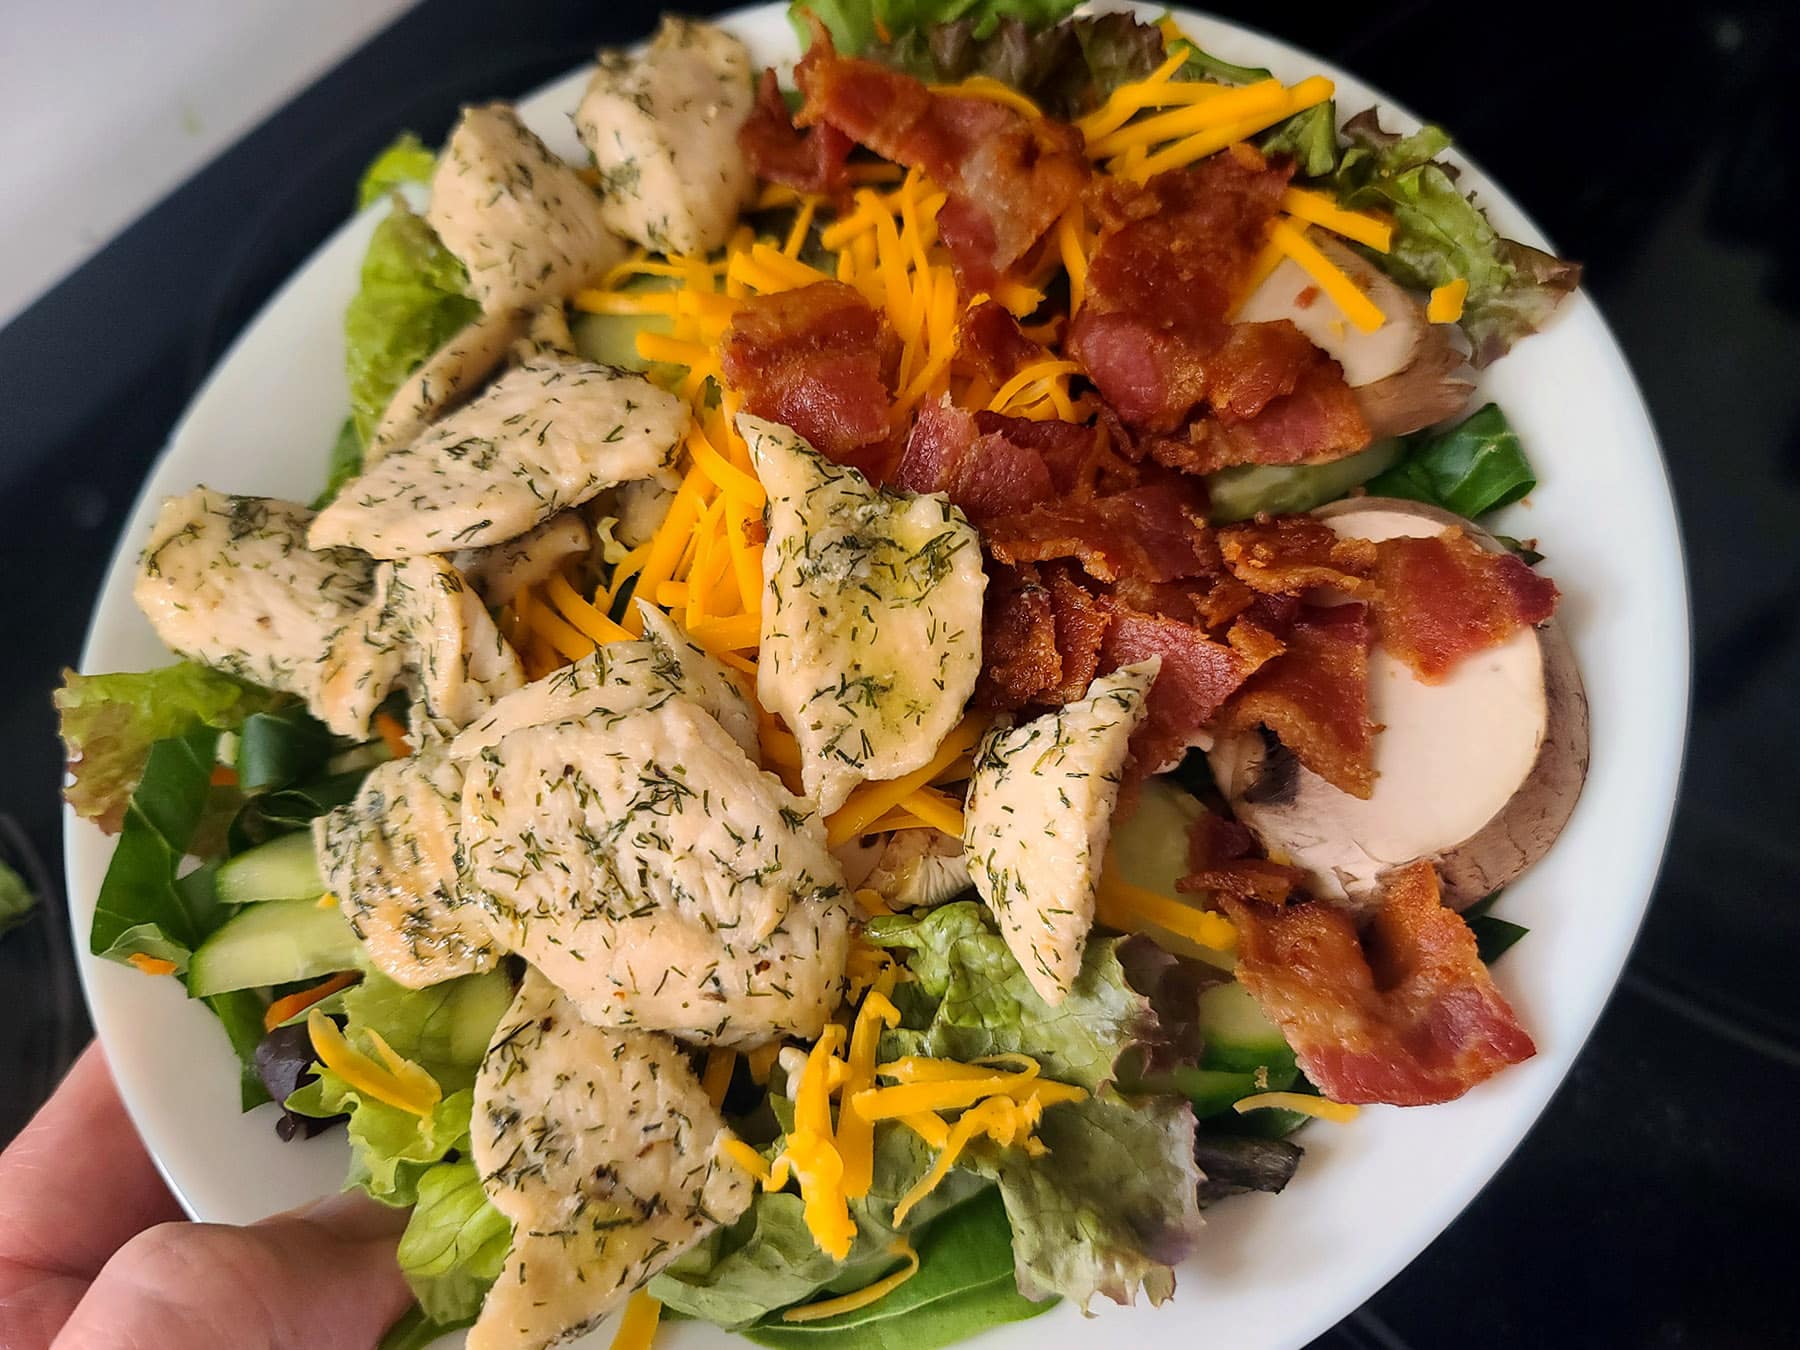 A bowl of salad with chicken and bacon on it.